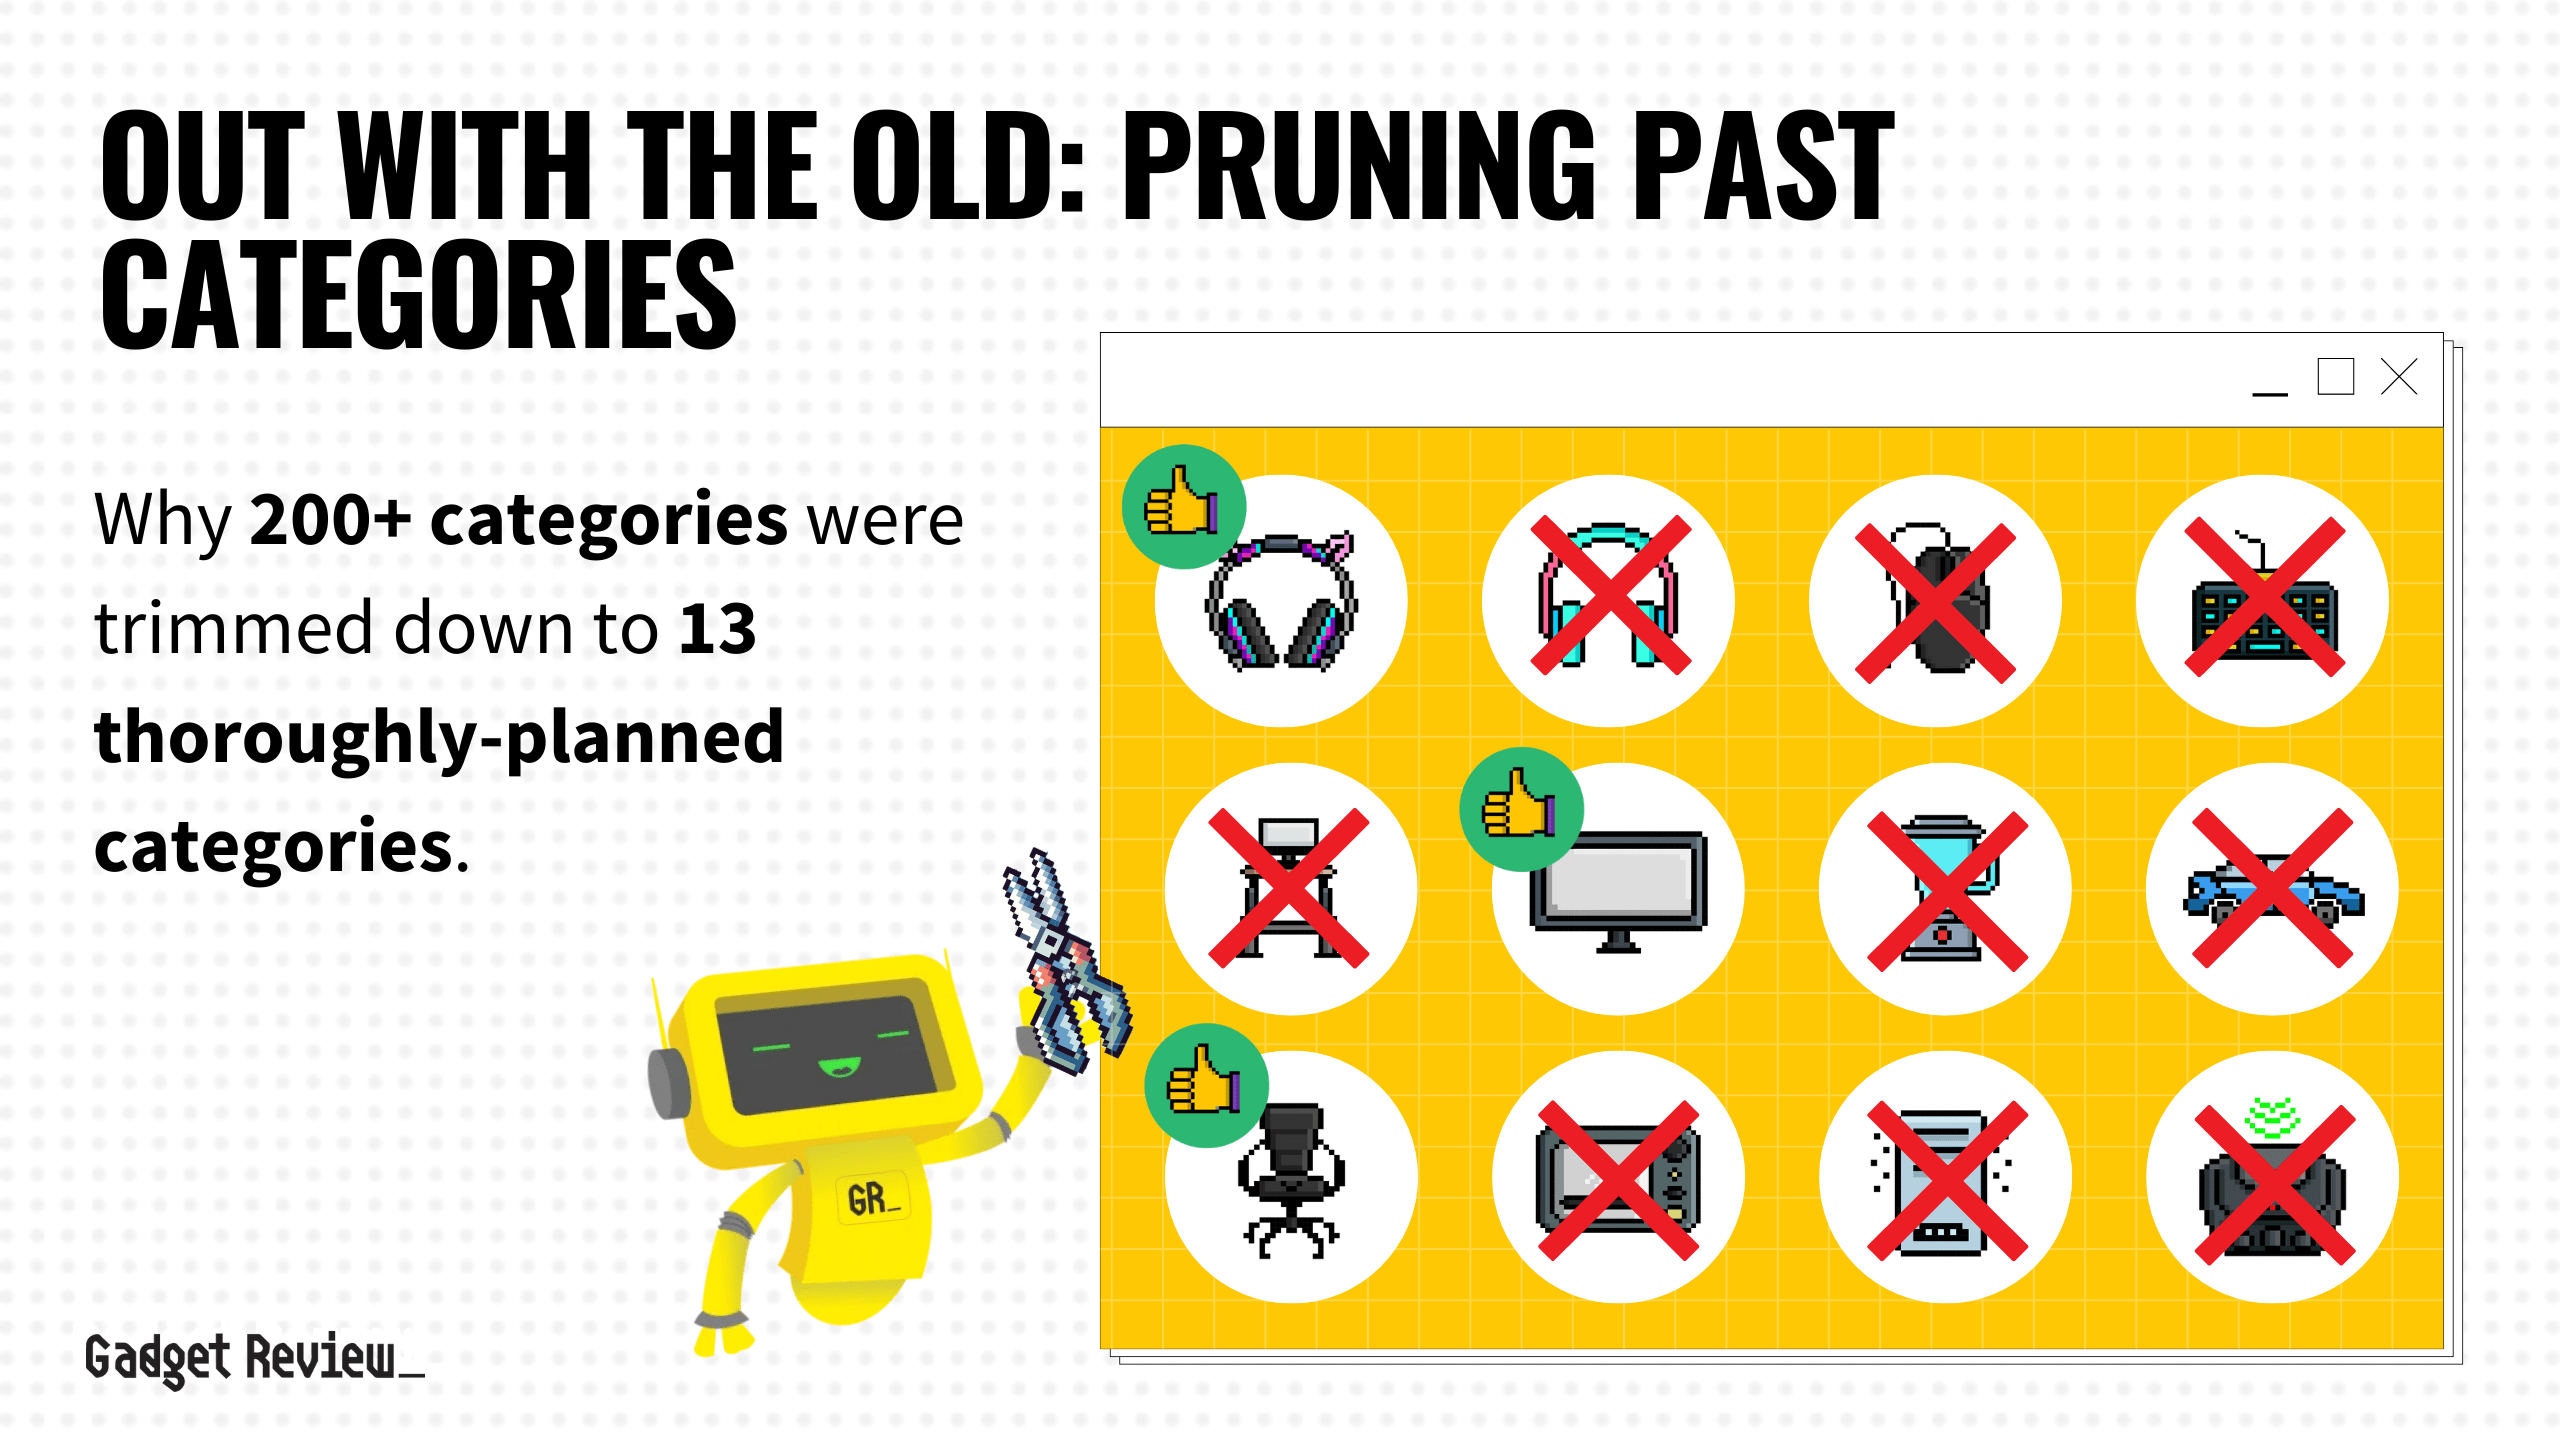 Out with the Old: Pruning Past Categories